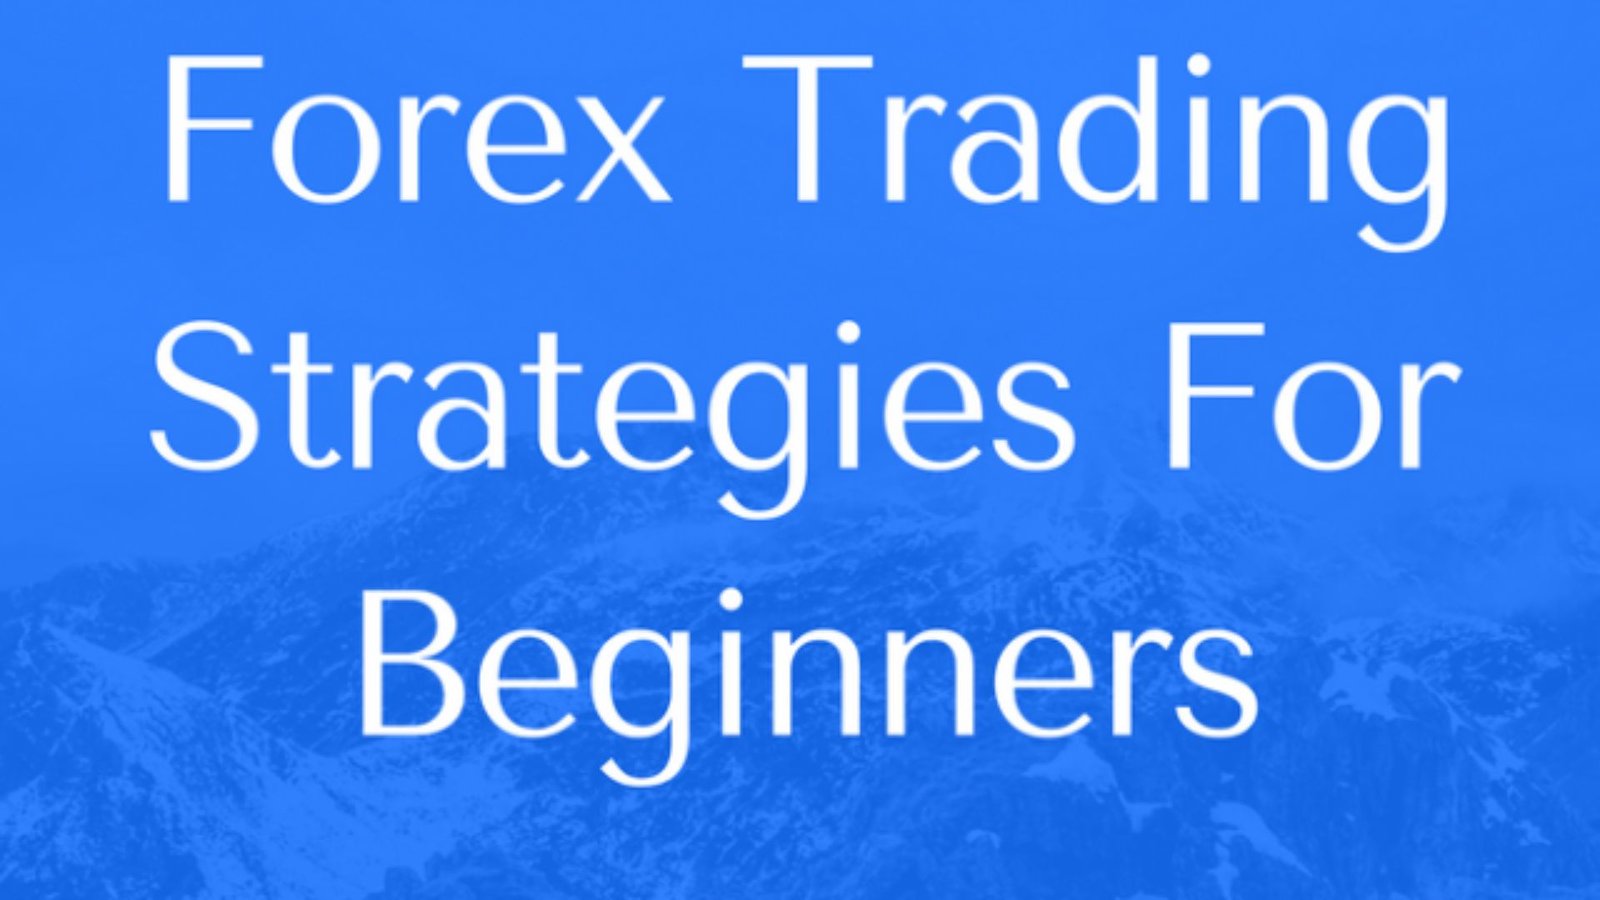 a text written Forex Trading Strategies For Beginners